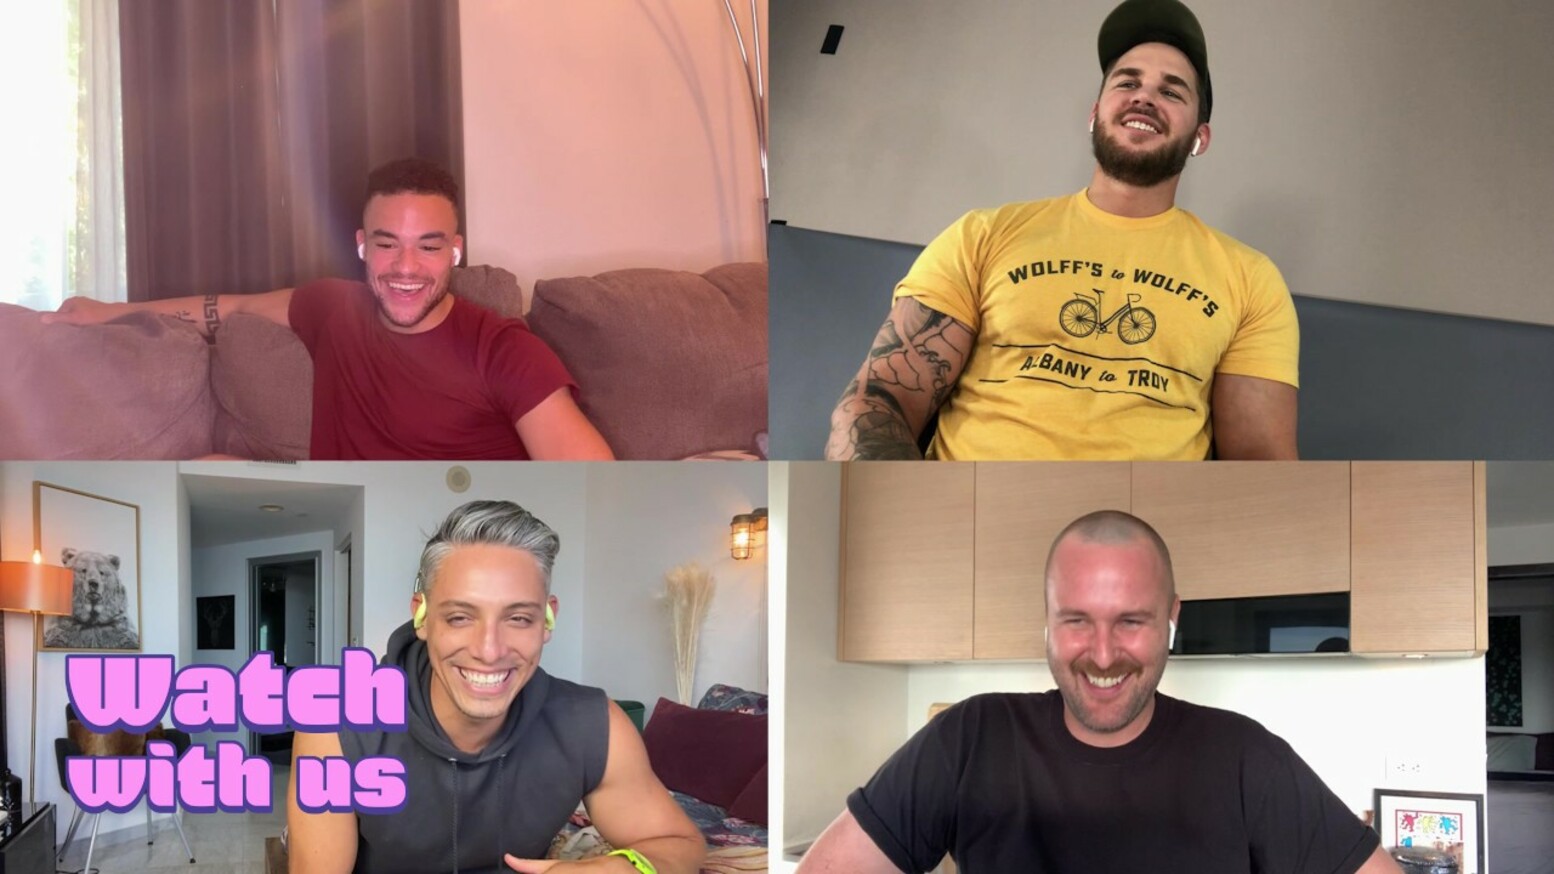 Watch With Us: Look What the Boys Dragged In